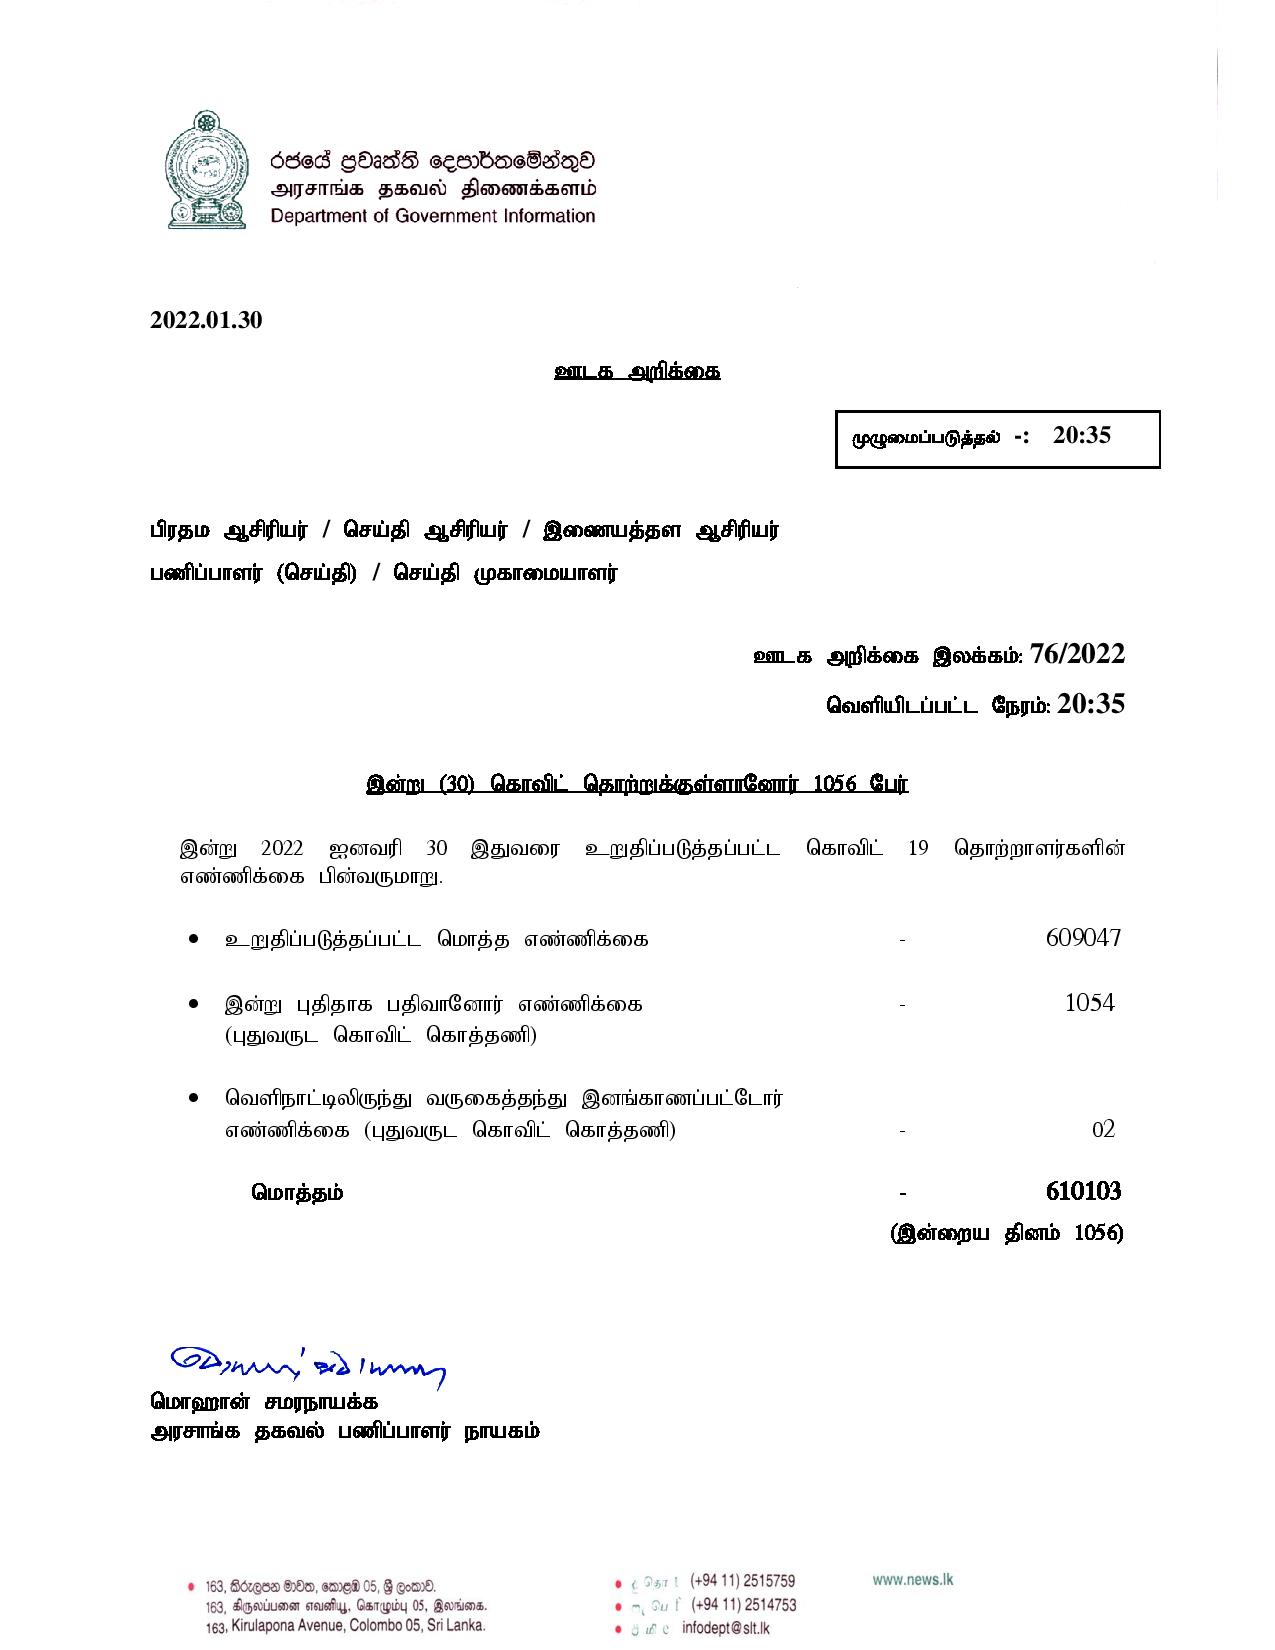 Press Release 76 Tamil page 001